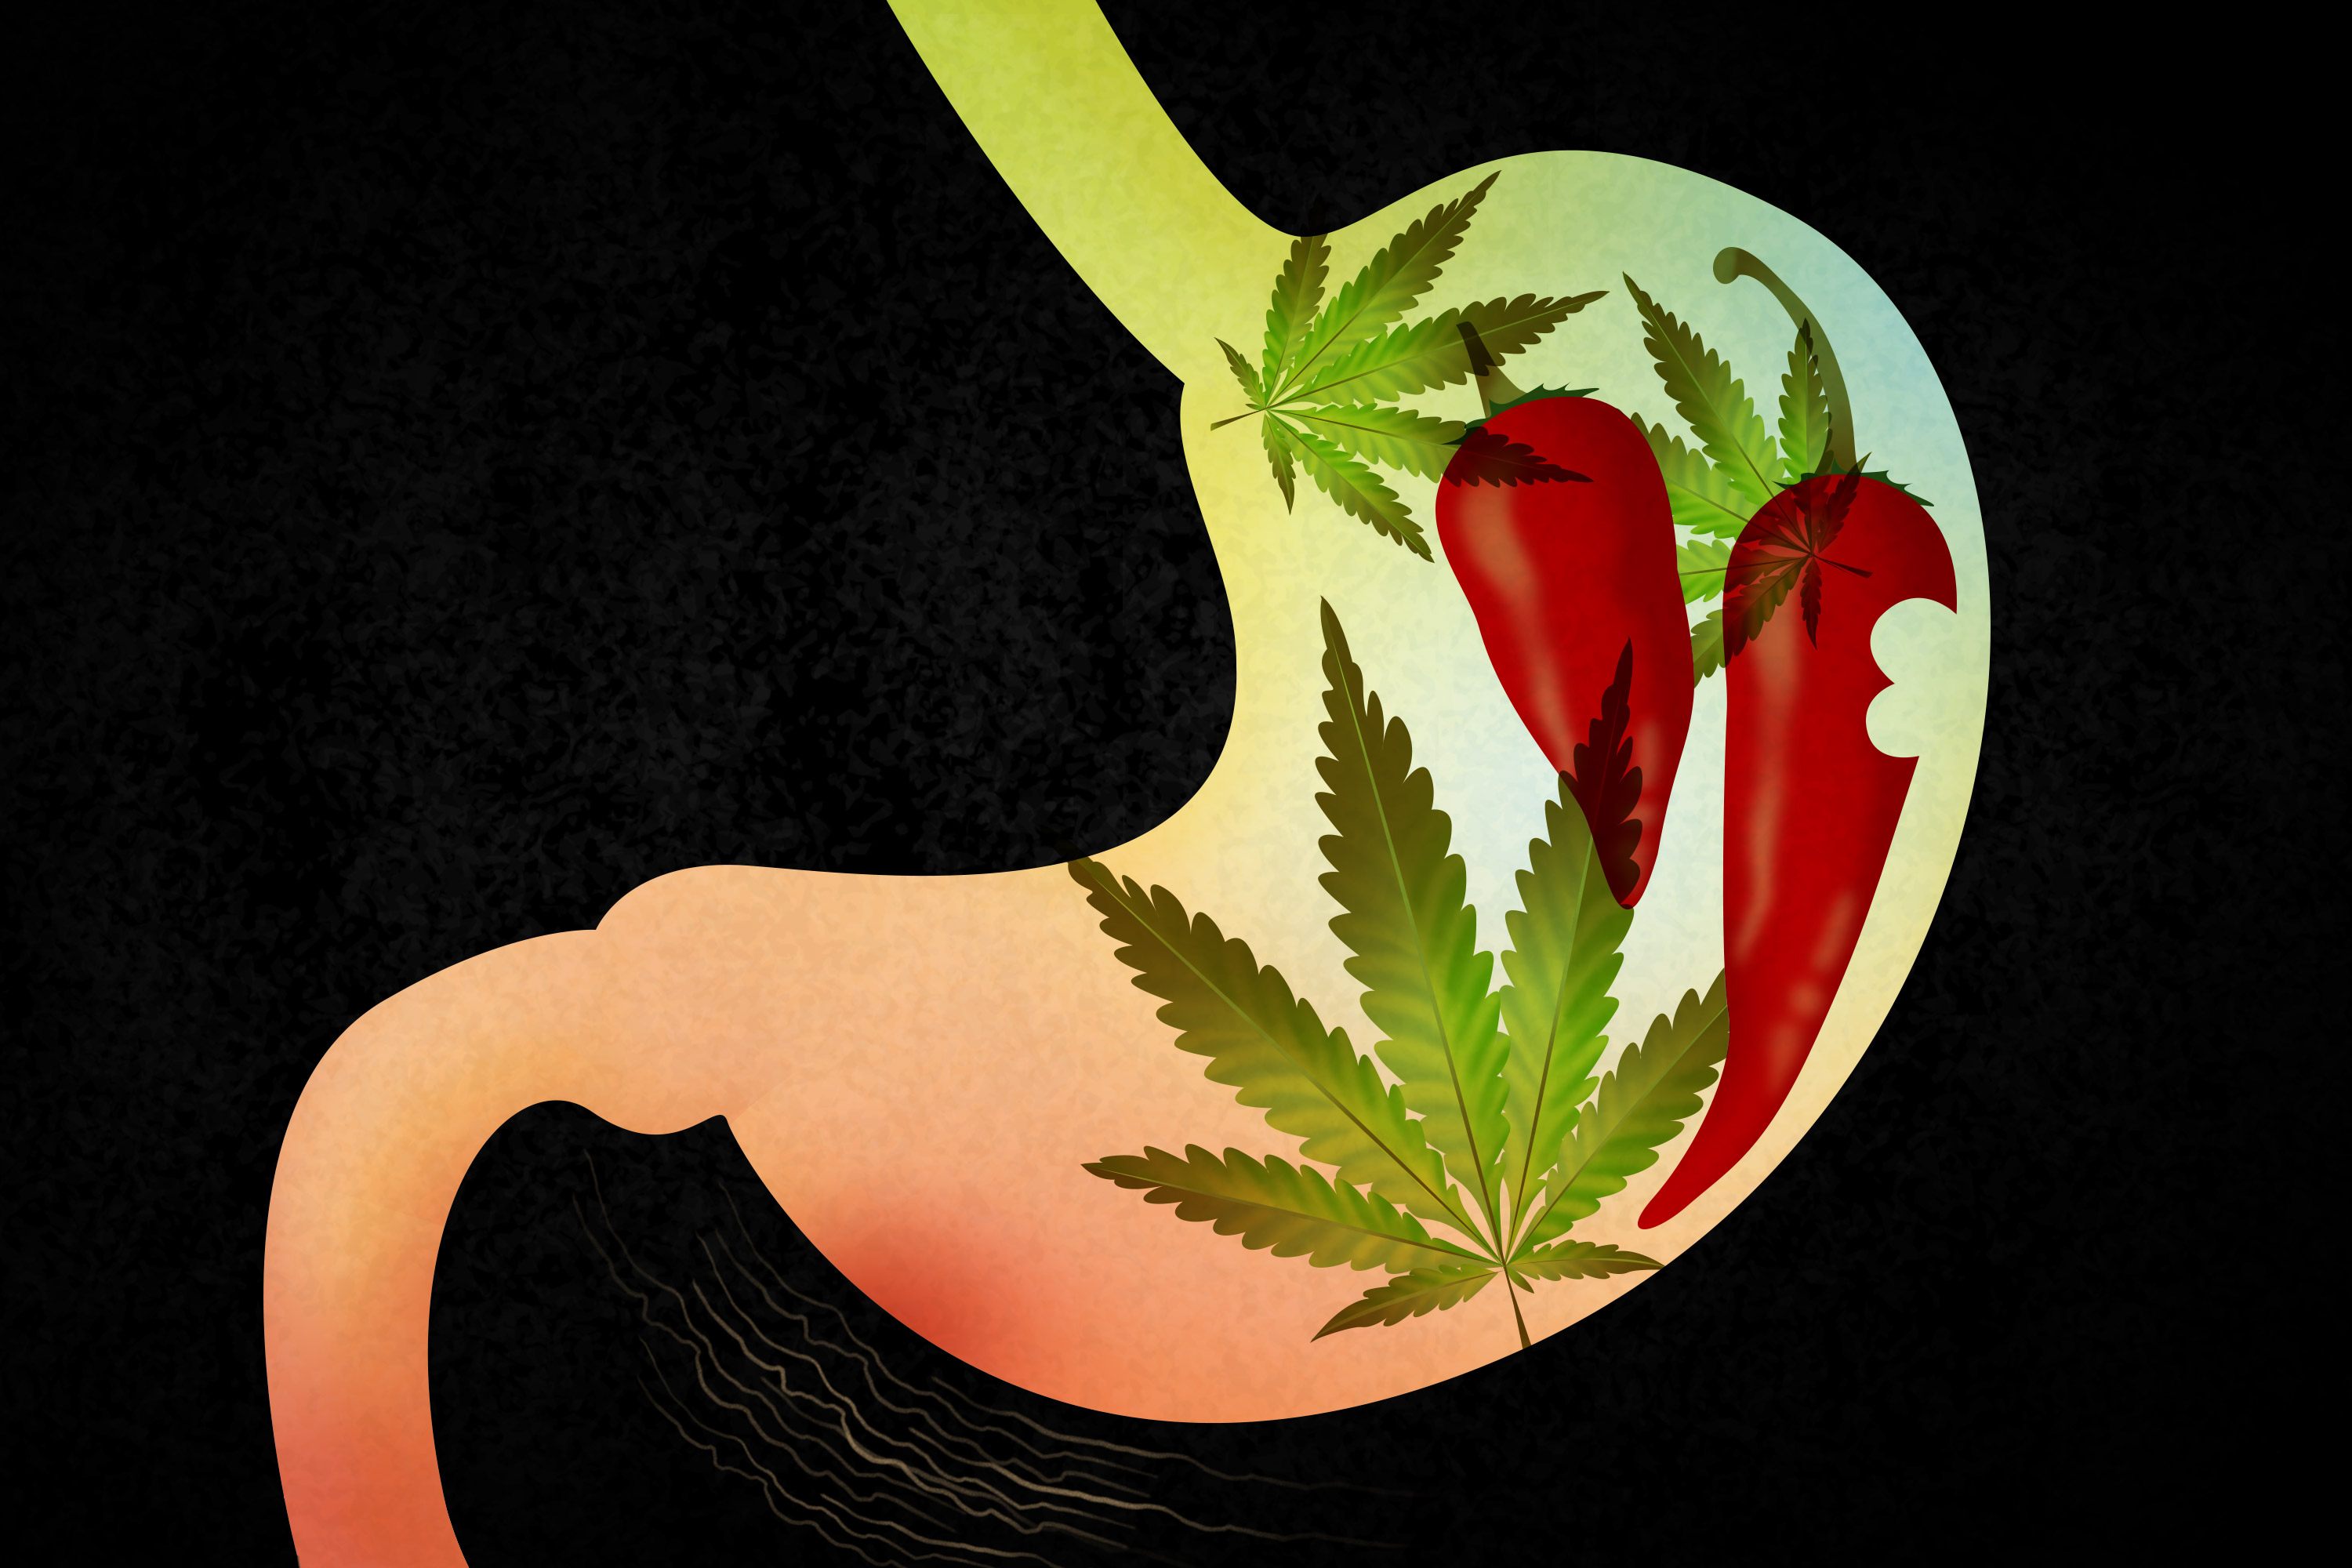 UConn Health researchers have found a connection between chili peppers and marijuana that could lead to new therapies for gastrointestinal disease. (Yesenia Carrero/UConn Illustration)